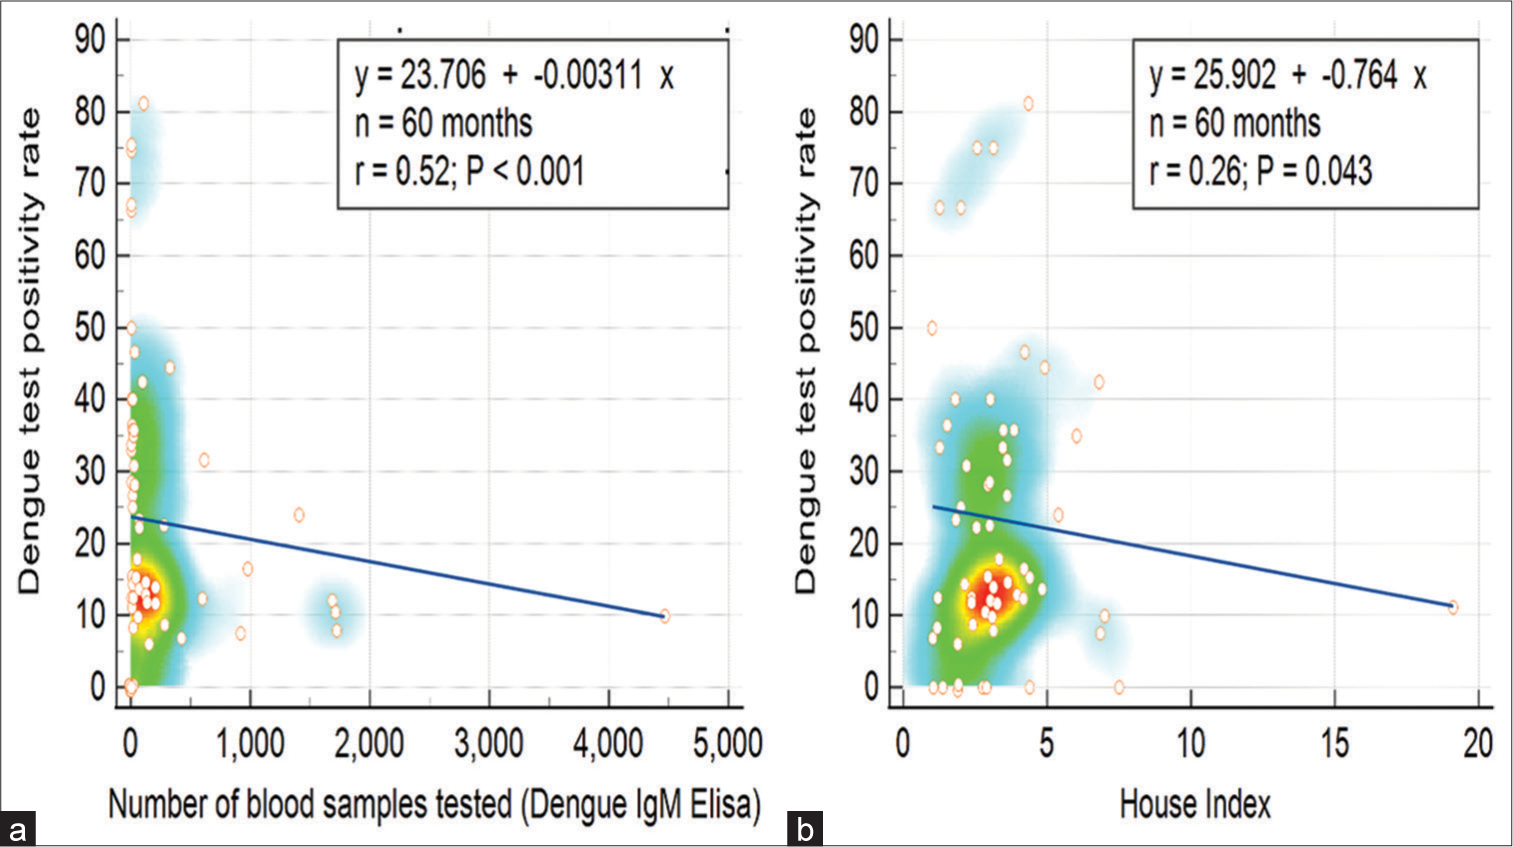 Heat map and scatter plots depicting the linear relationship between the dengue test positivity rate as the dependent variable and the independent variables: (a) the total number of blood samples tested (Dengue immunoglobulin M enzyme-linked immunosorbent assay) and (b) the house index (month-wise).